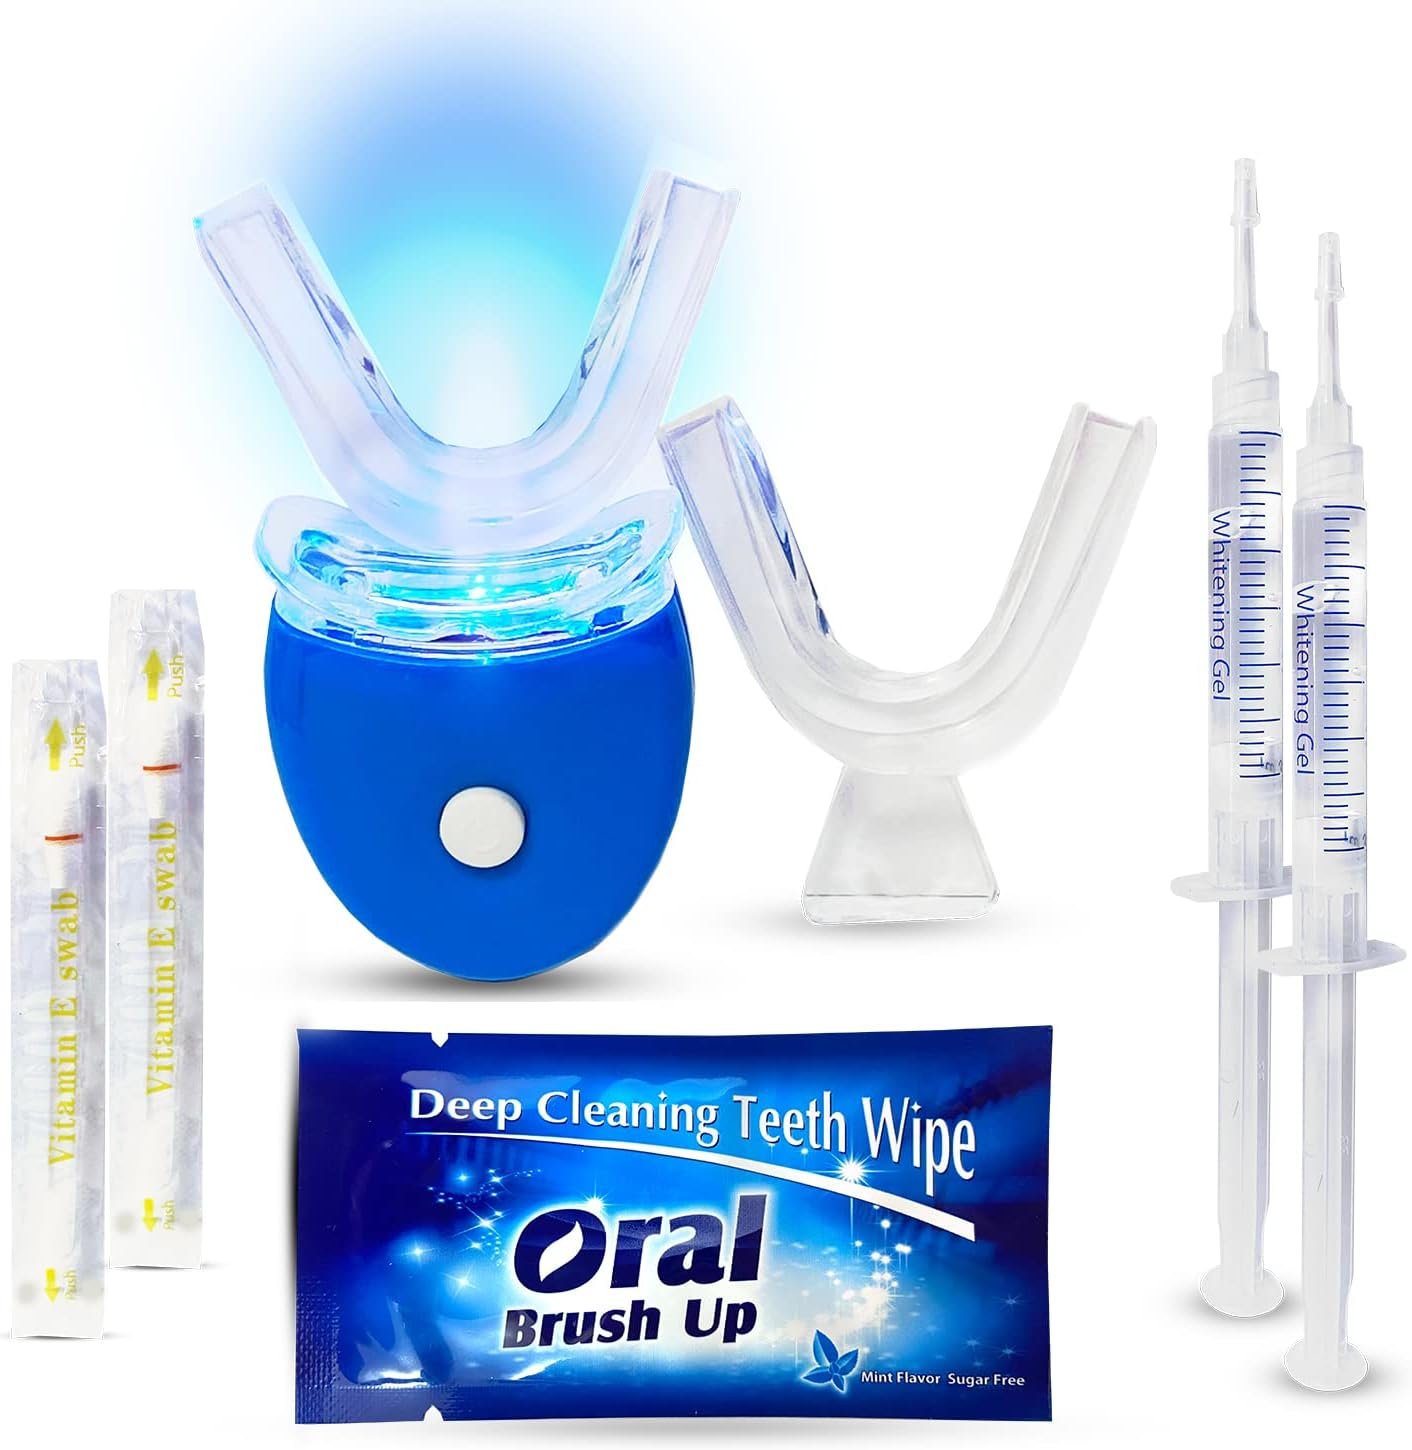 MagicBrite Complete Teeth Whitening Kit at Home Whitener - LED Light, 35% Carbamide Peroxide, 2 Mouth Trays, (3) 3ml Gel Syringes, Painless Effective